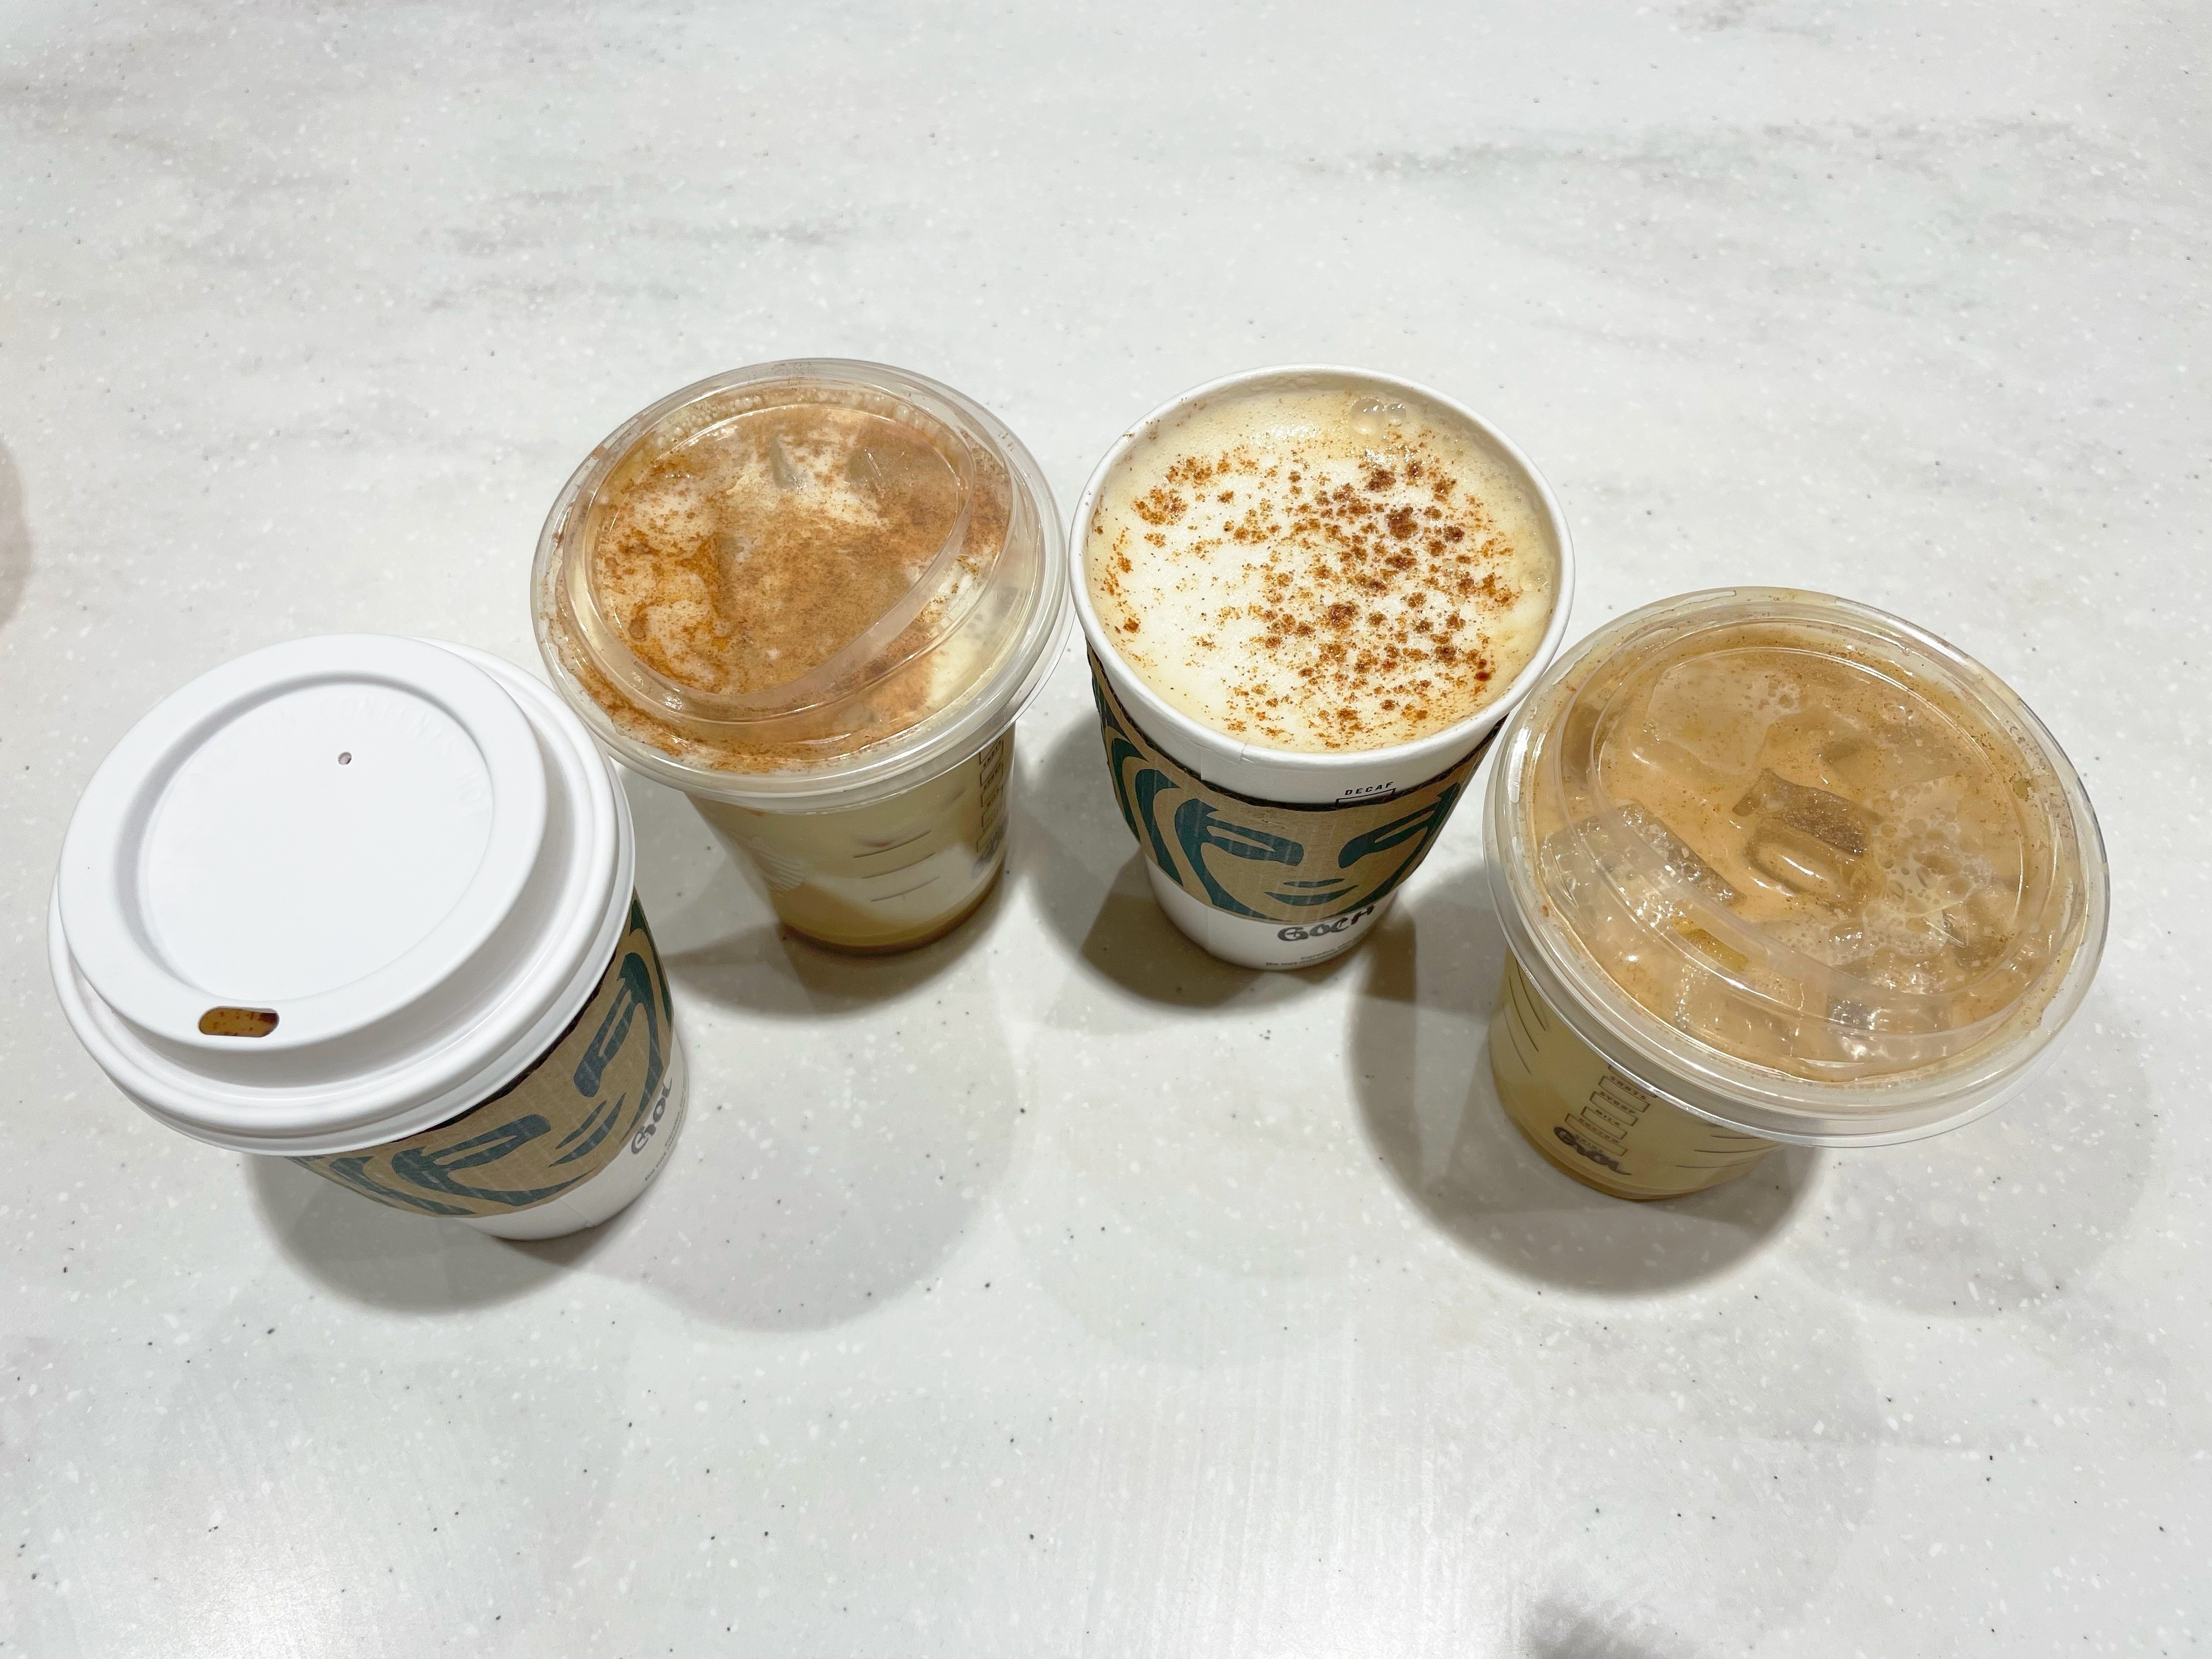 The four new drinks are being shown from the top view